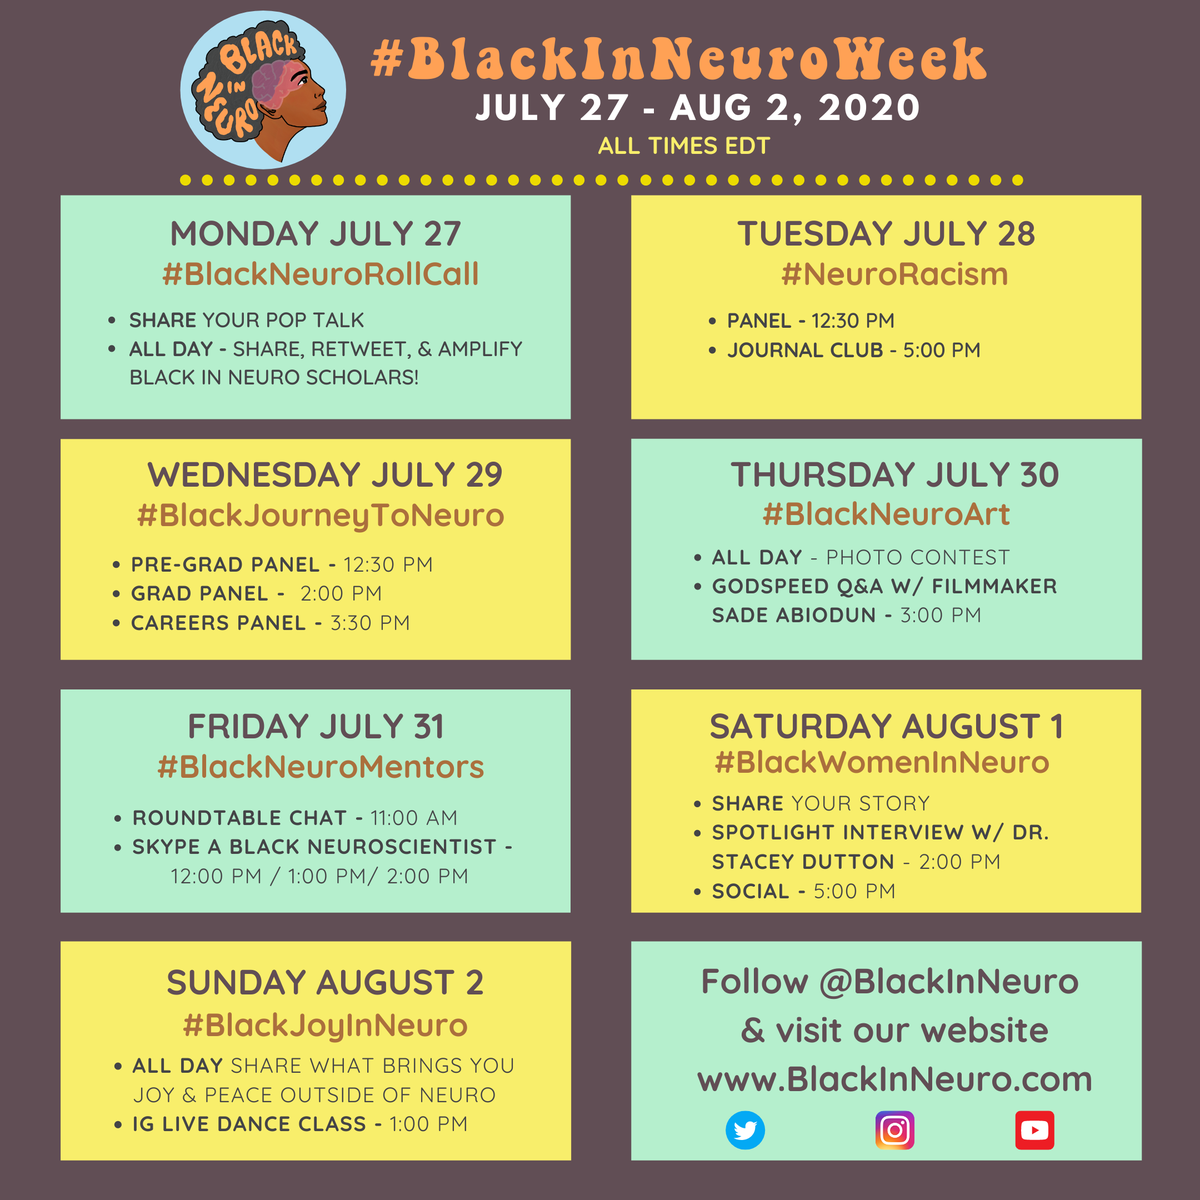 Get ready, ya’ll! 🥳📢

#BlackInNeuroWeek is HERE! Drop a '🧠' emoji if you're ready for #BlackNeuroRollCall !

To make sure you’re ready for all of the excellence in store, check out our full schedule here.

For detailed instructions on each day, visit BlackInNeuro.com/binweek